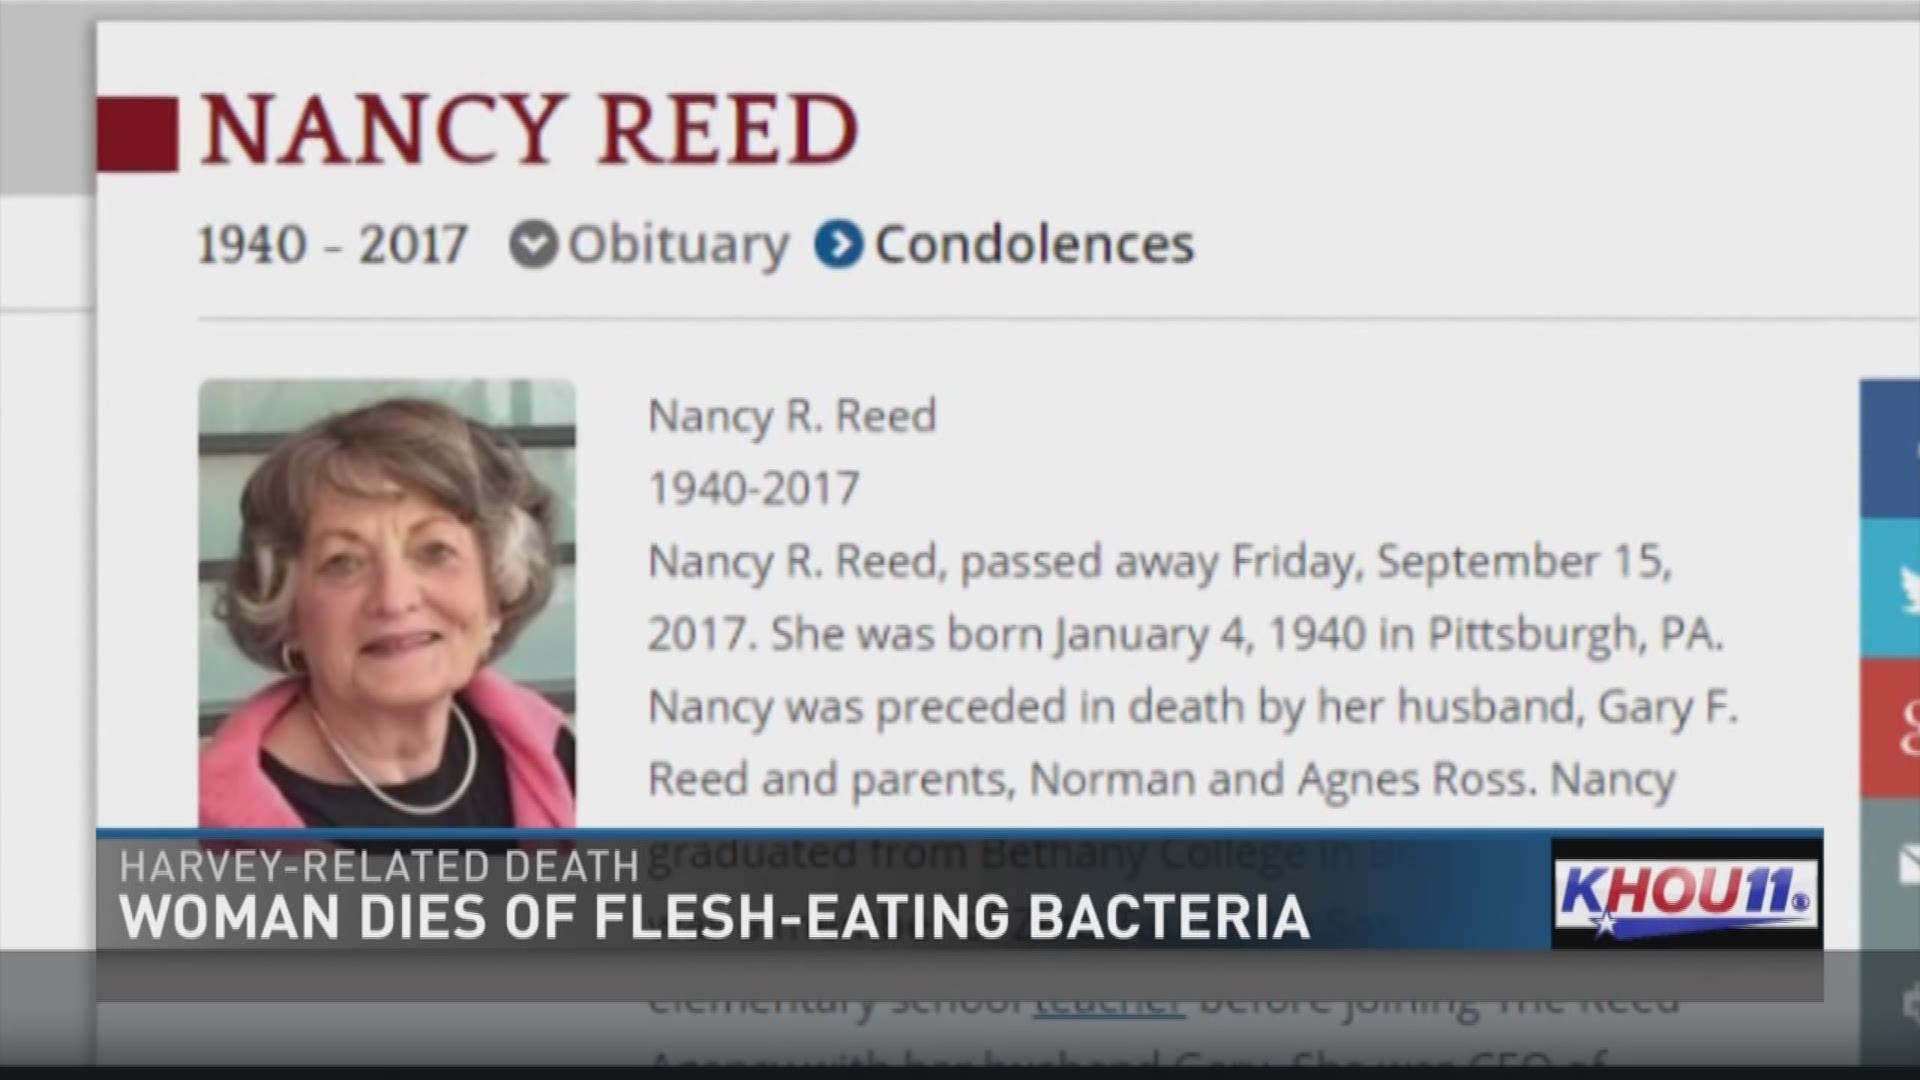 Nancy Reed, 77, died from flesh eating bacteria she contracted when she fell into floodwaters during Hurricane Harvey.